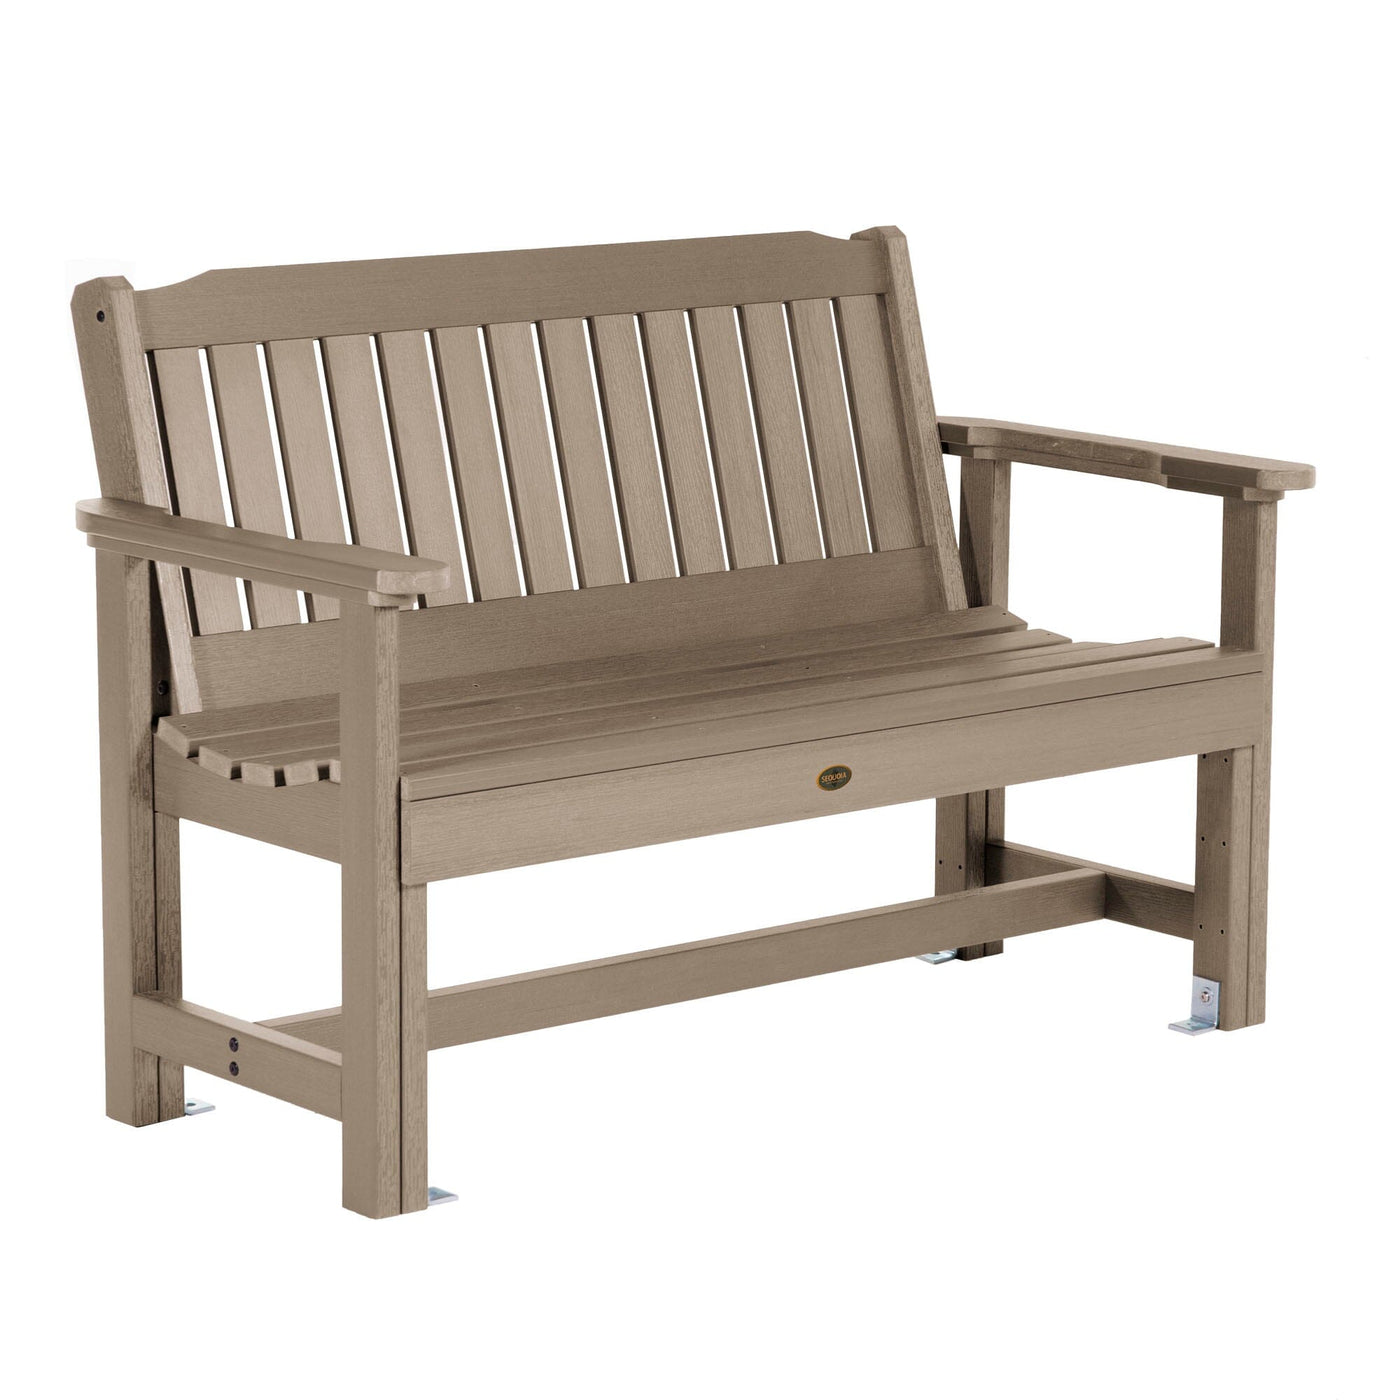 Commercial Grade Exeter 4' Garden Bench Bench Sequoia Professional Woodland Brown 